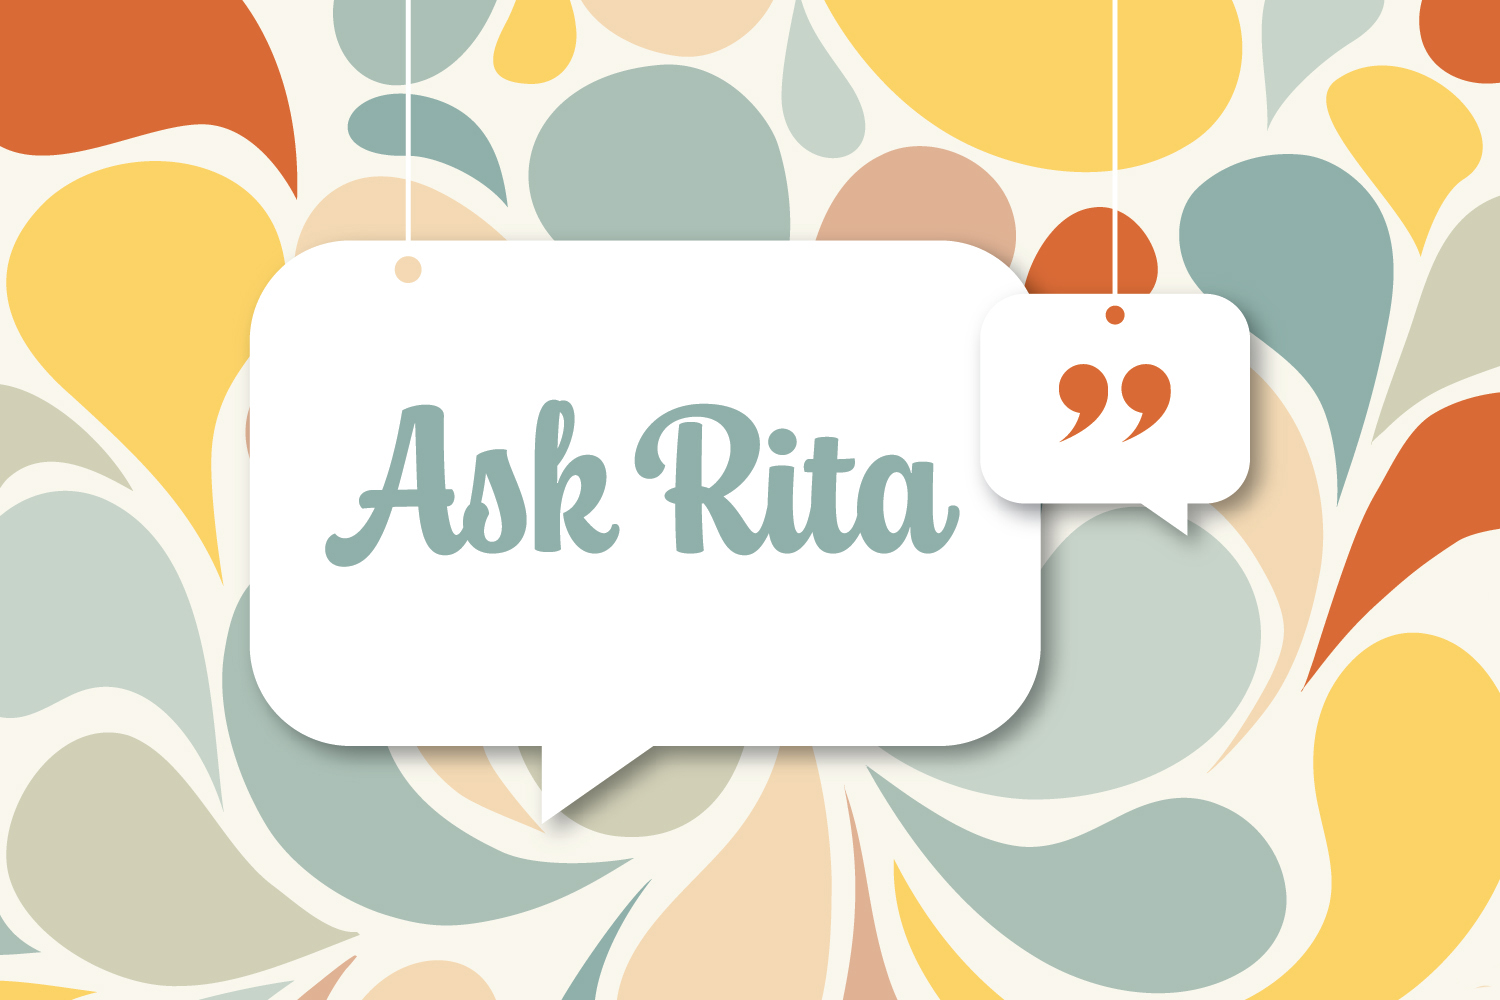 Ask Rita: How Can We Help Our Employee Care for Family During COVID-19?